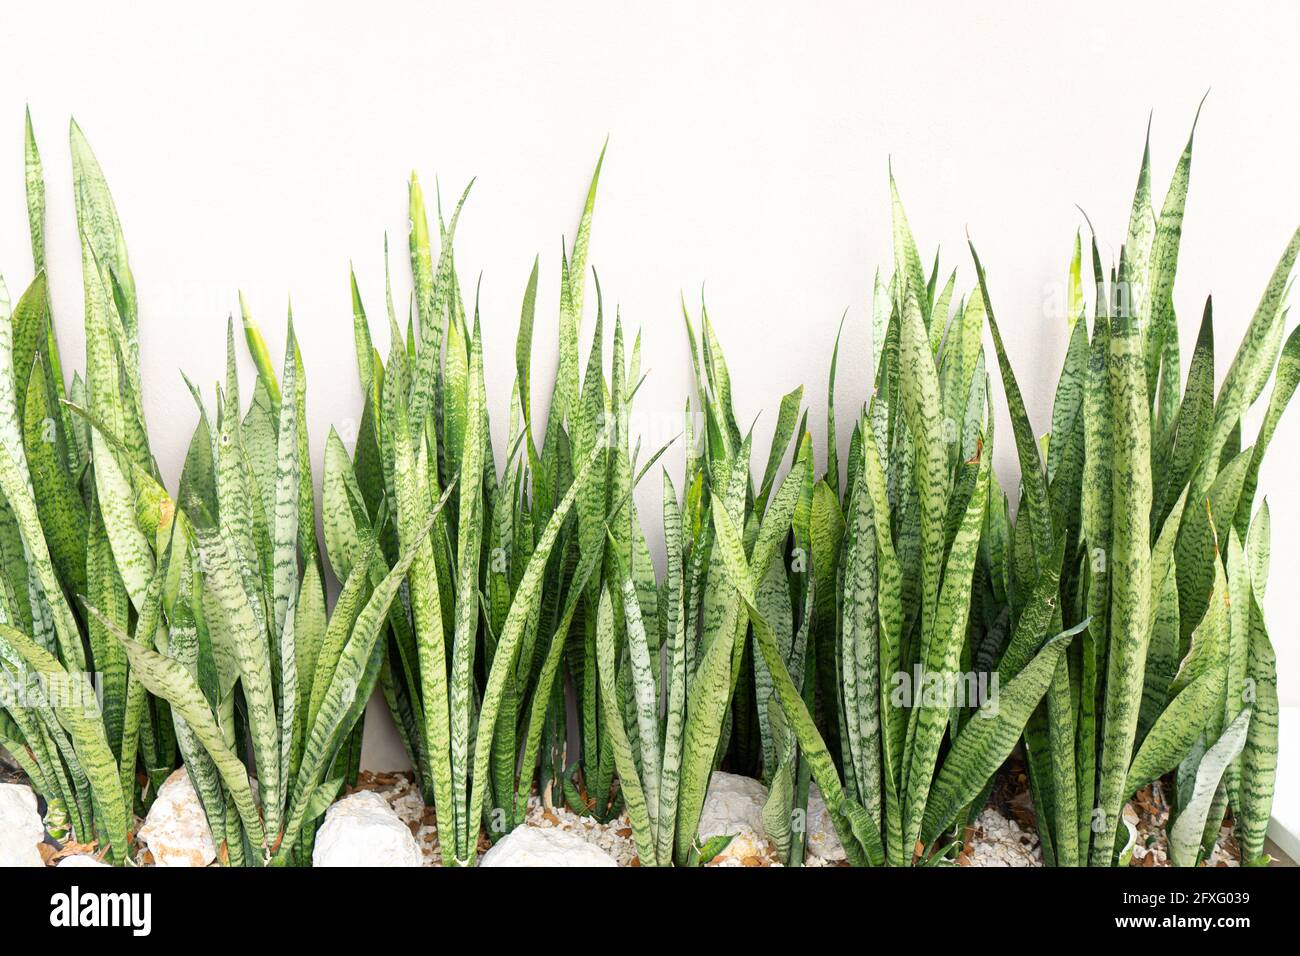 Bushes of the Sansevieria trifasciata plant growing by a white wall. Exterior decoration. Stock Photo